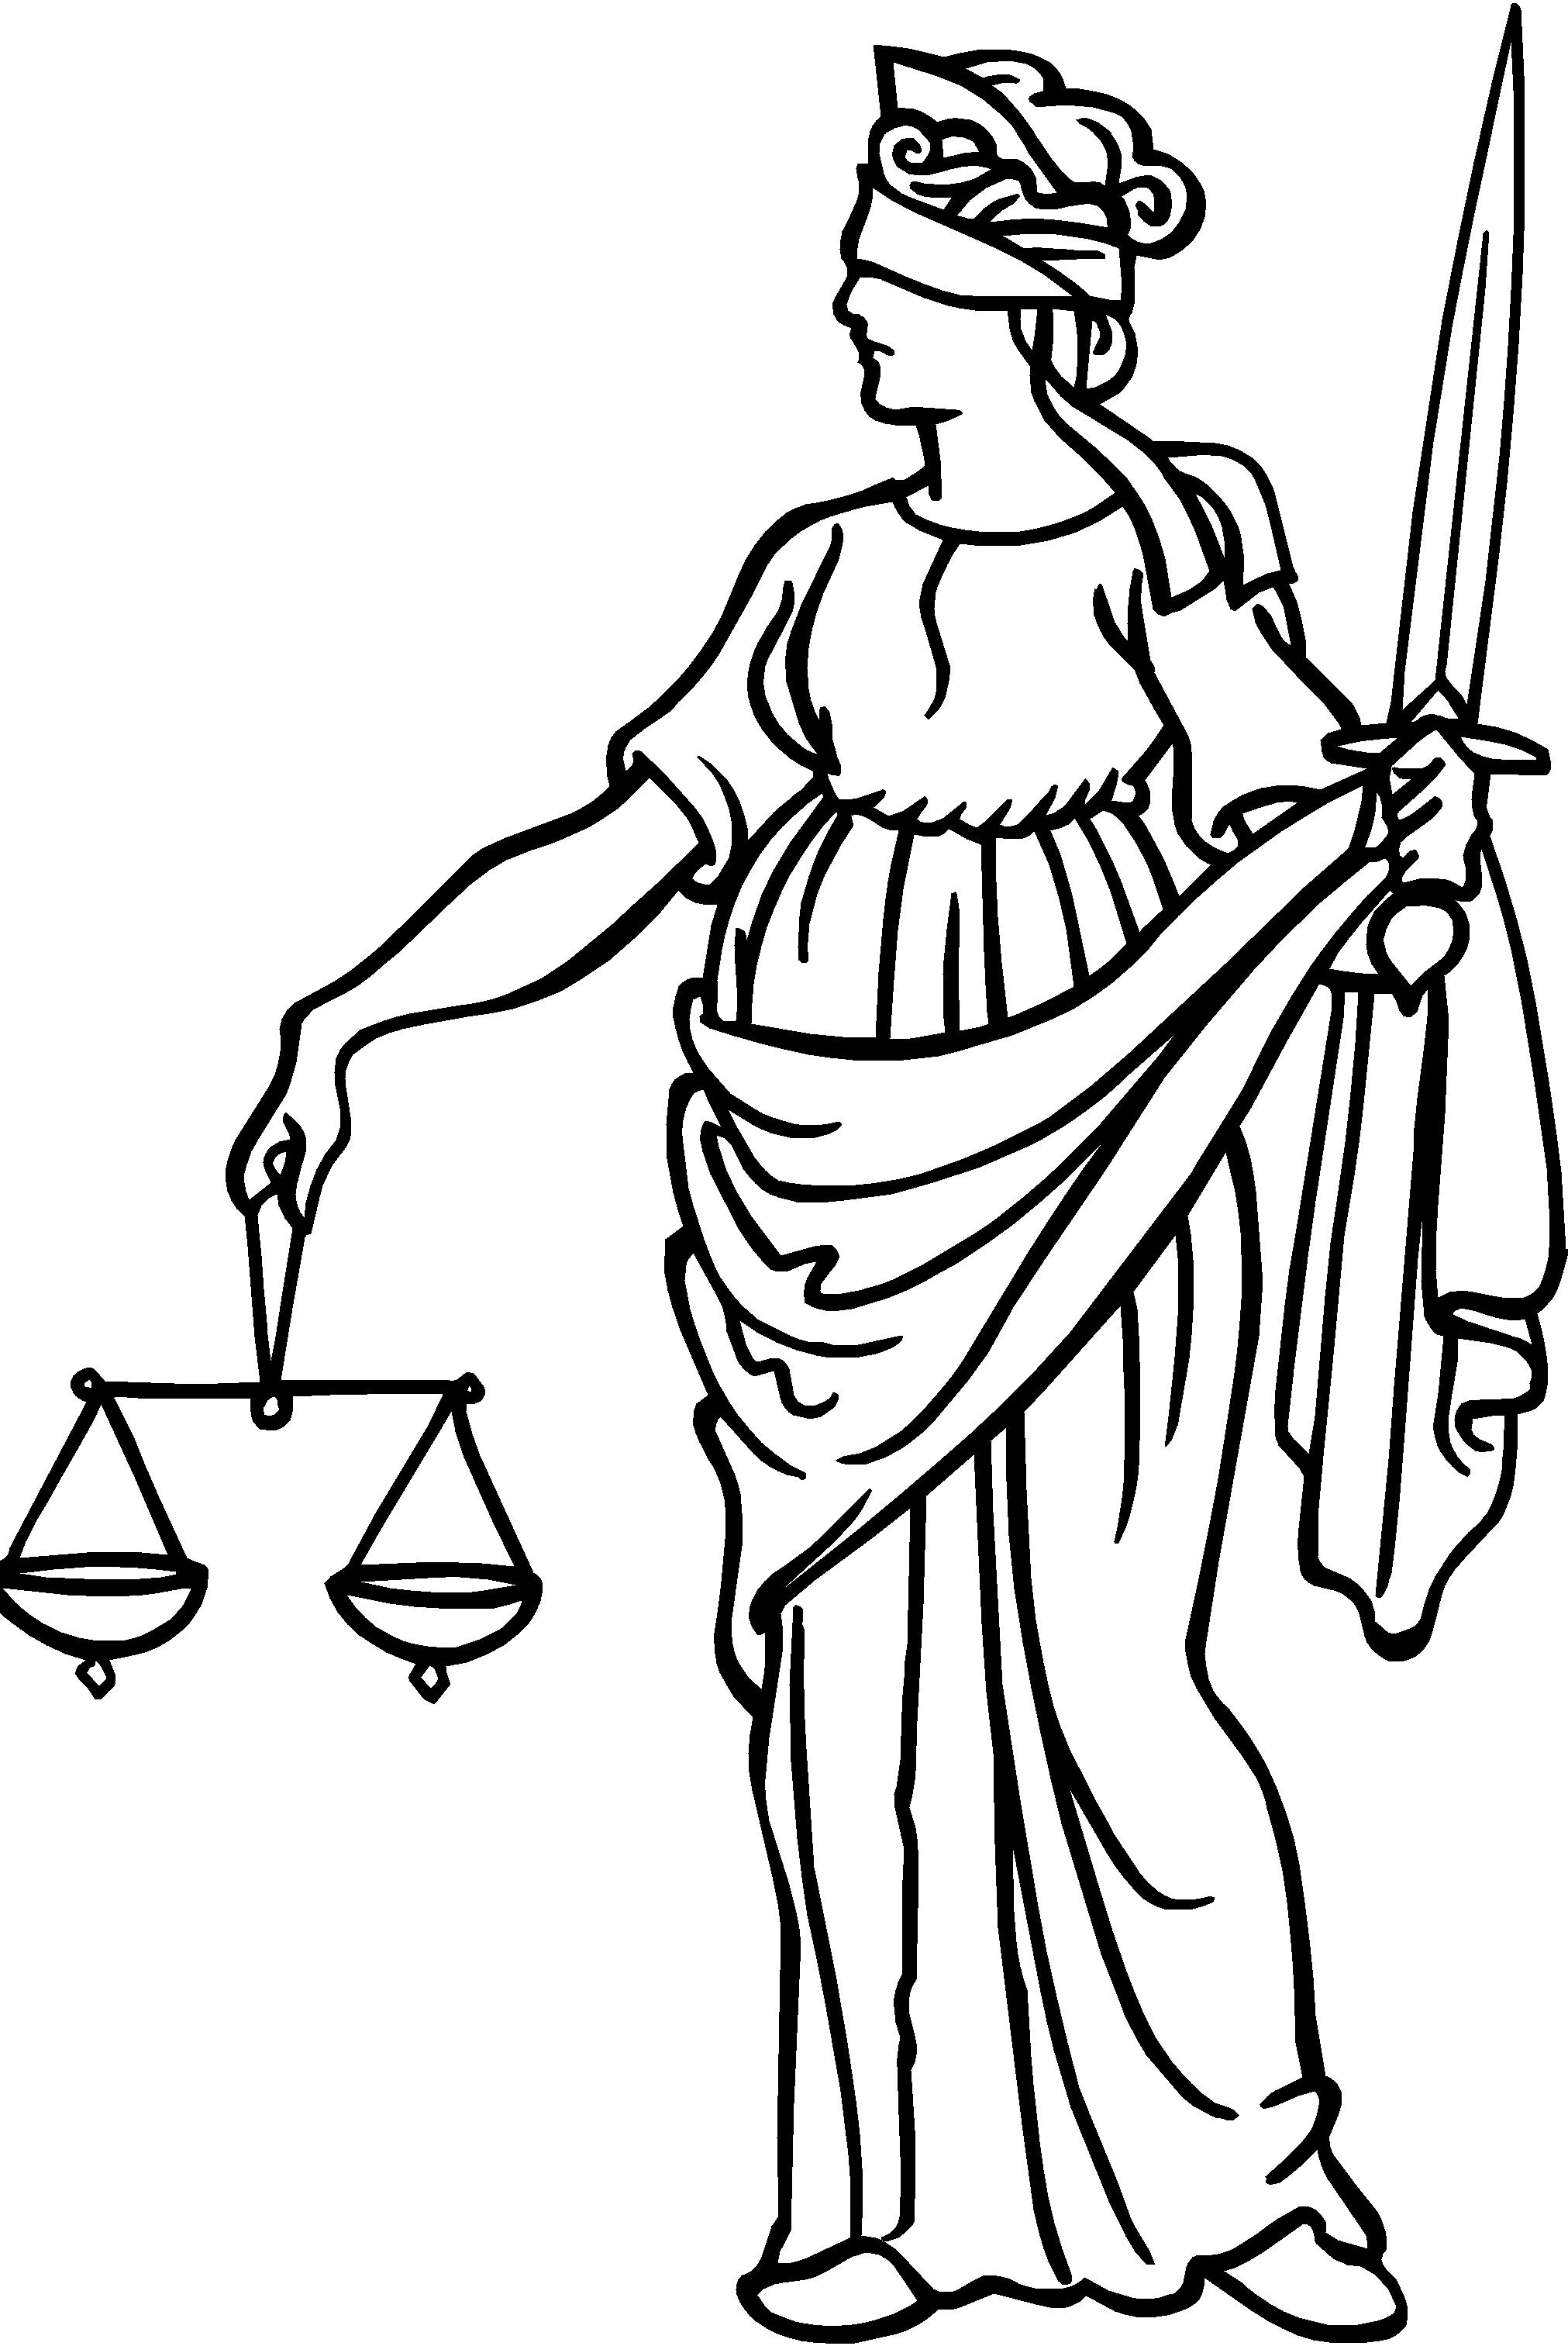 Lady Of Justice - ClipArt Best